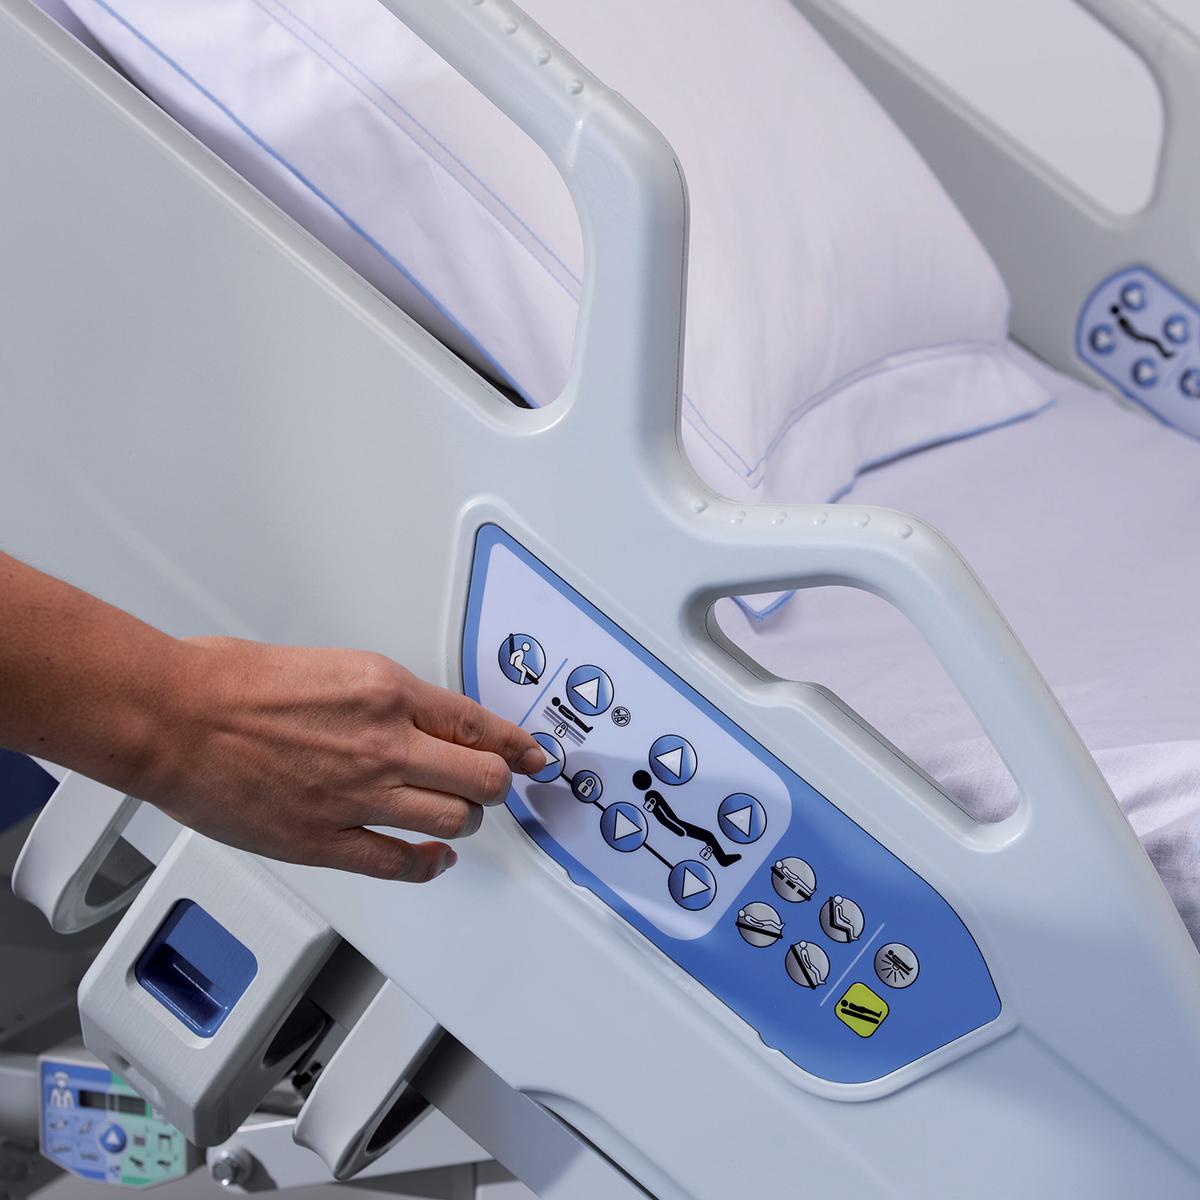 A hand presses a button on the Hillrom 900 bed’s control panel 